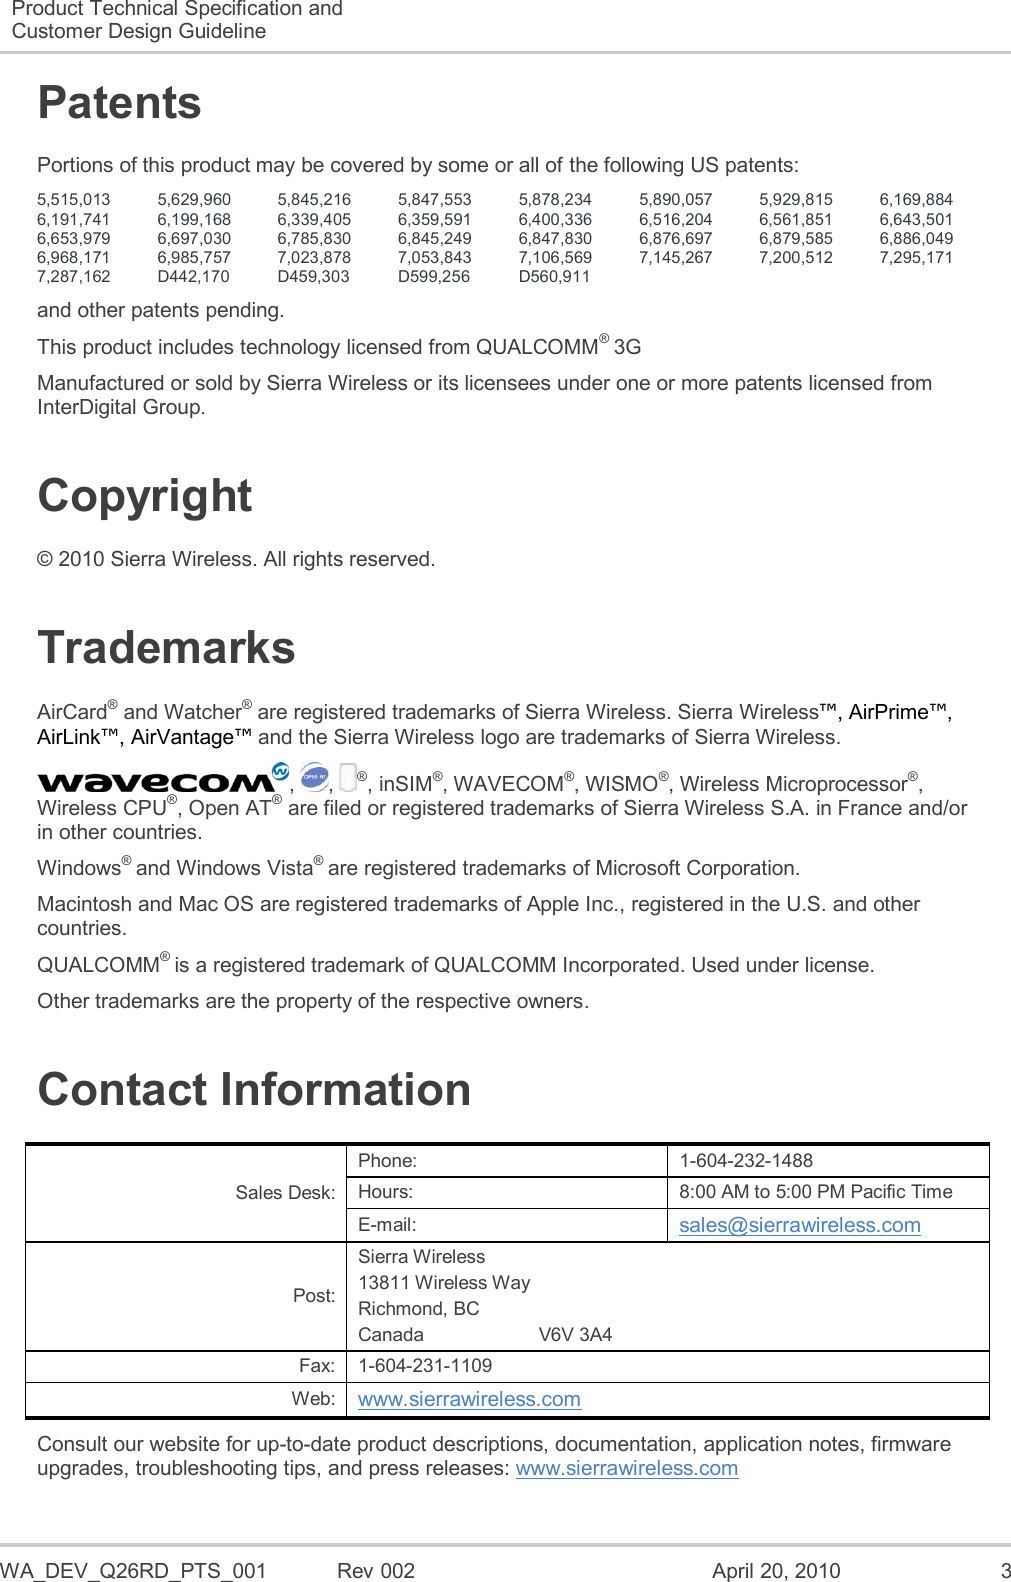  WA_DEV_Q26RD_PTS_001  Rev 002  April 20, 2010  3 Product Technical Specification and Customer Design Guideline  Patents Portions of this product may be covered by some or all of the following US patents: 5,515,013 5,629,960 5,845,216 5,847,553 5,878,234 5,890,057 5,929,815 6,169,884 6,191,741 6,199,168 6,339,405 6,359,591 6,400,336 6,516,204 6,561,851 6,643,501 6,653,979 6,697,030 6,785,830 6,845,249 6,847,830 6,876,697 6,879,585 6,886,049 6,968,171 6,985,757 7,023,878 7,053,843 7,106,569 7,145,267 7,200,512 7,295,171 7,287,162 D442,170 D459,303 D599,256 D560,911    and other patents pending. This product includes technology licensed from QUALCOMM® 3G Manufactured or sold by Sierra Wireless or its licensees under one or more patents licensed from InterDigital Group. Copyright © 2010 Sierra Wireless. All rights reserved. Trademarks AirCard® and Watcher® are registered trademarks of Sierra Wireless. Sierra Wireless™, AirPrime™, AirLink™, AirVantage™ and the Sierra Wireless logo are trademarks of Sierra Wireless. ,  ,  ®, inSIM®, WAVECOM®, WISMO®, Wireless Microprocessor®, Wireless CPU®, Open AT® are filed or registered trademarks of Sierra Wireless S.A. in France and/or in other countries. Windows® and Windows Vista® are registered trademarks of Microsoft Corporation. Macintosh and Mac OS are registered trademarks of Apple Inc., registered in the U.S. and other countries. QUALCOMM® is a registered trademark of QUALCOMM Incorporated. Used under license. Other trademarks are the property of the respective owners. Contact Information Sales Desk: Phone: 1-604-232-1488 Hours: 8:00 AM to 5:00 PM Pacific Time E-mail: sales@sierrawireless.com Post: Sierra Wireless 13811 Wireless Way Richmond, BC Canada                      V6V 3A4 Fax: 1-604-231-1109 Web: www.sierrawireless.com Consult our website for up-to-date product descriptions, documentation, application notes, firmware upgrades, troubleshooting tips, and press releases: www.sierrawireless.com 